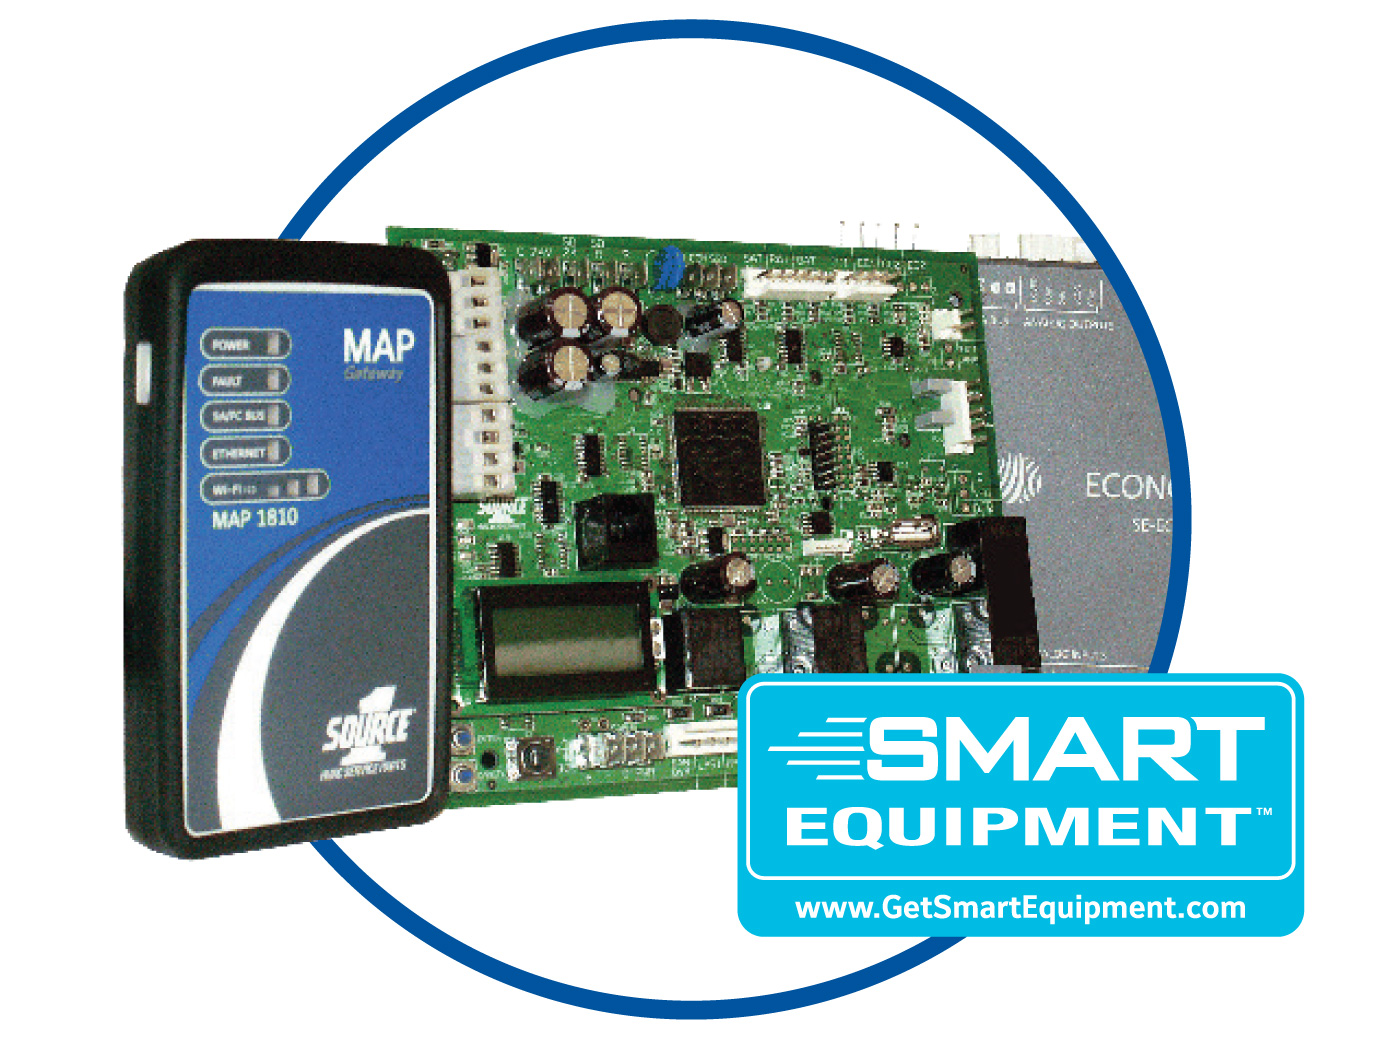 Smart Equipment control board and components for YORK packaged rooftop unit